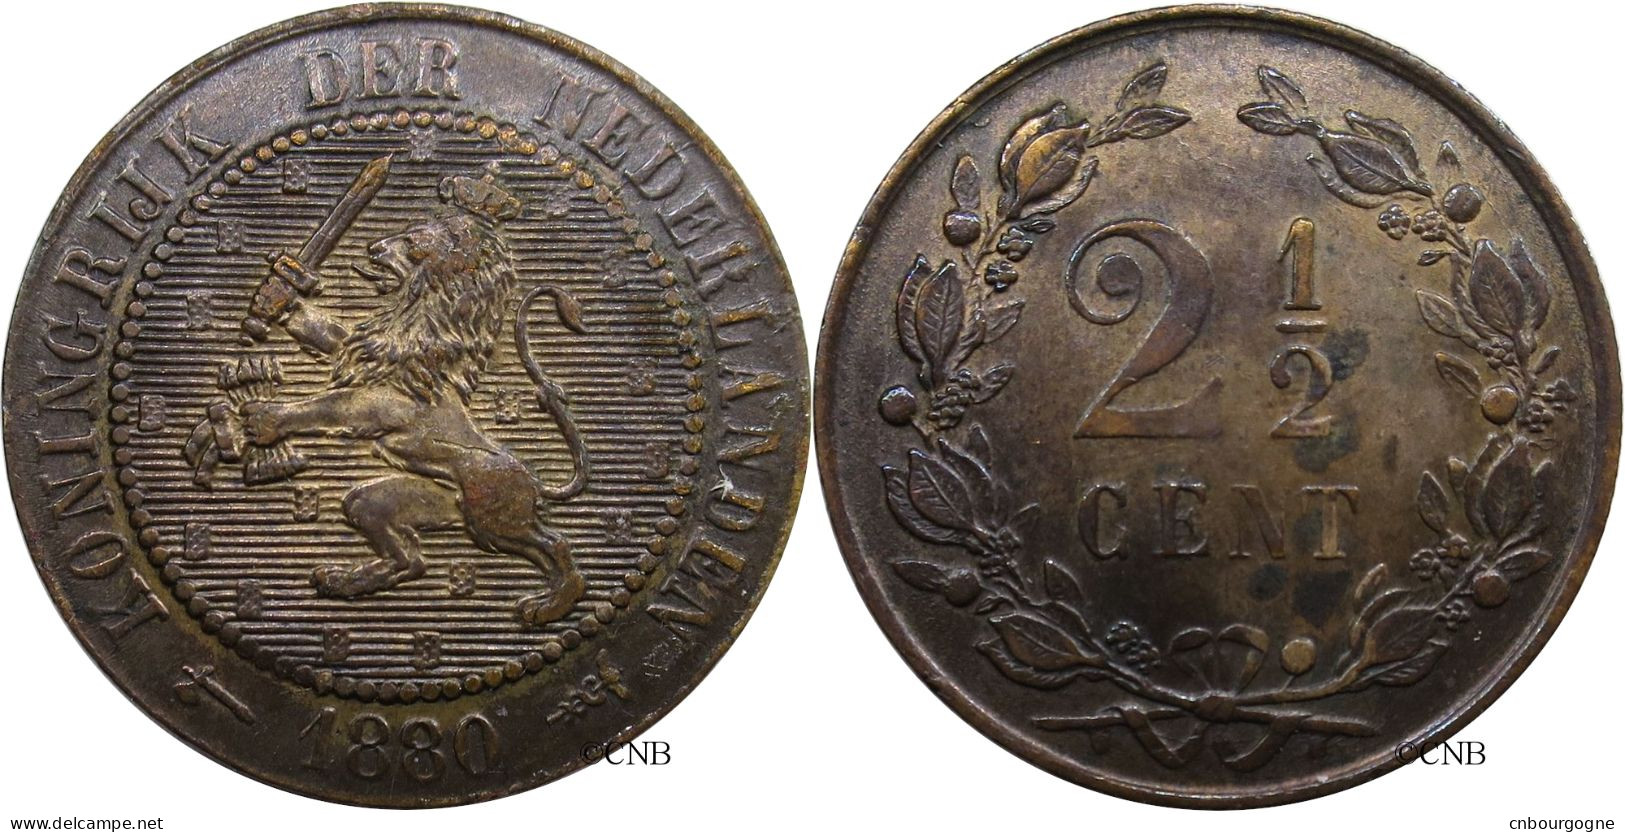 Pays-Bas - Royaume - Guillaume III - 2 1/2 Cents 1880 - SUP/AU55 - Mon4045 - 1849-1890: Willem III.